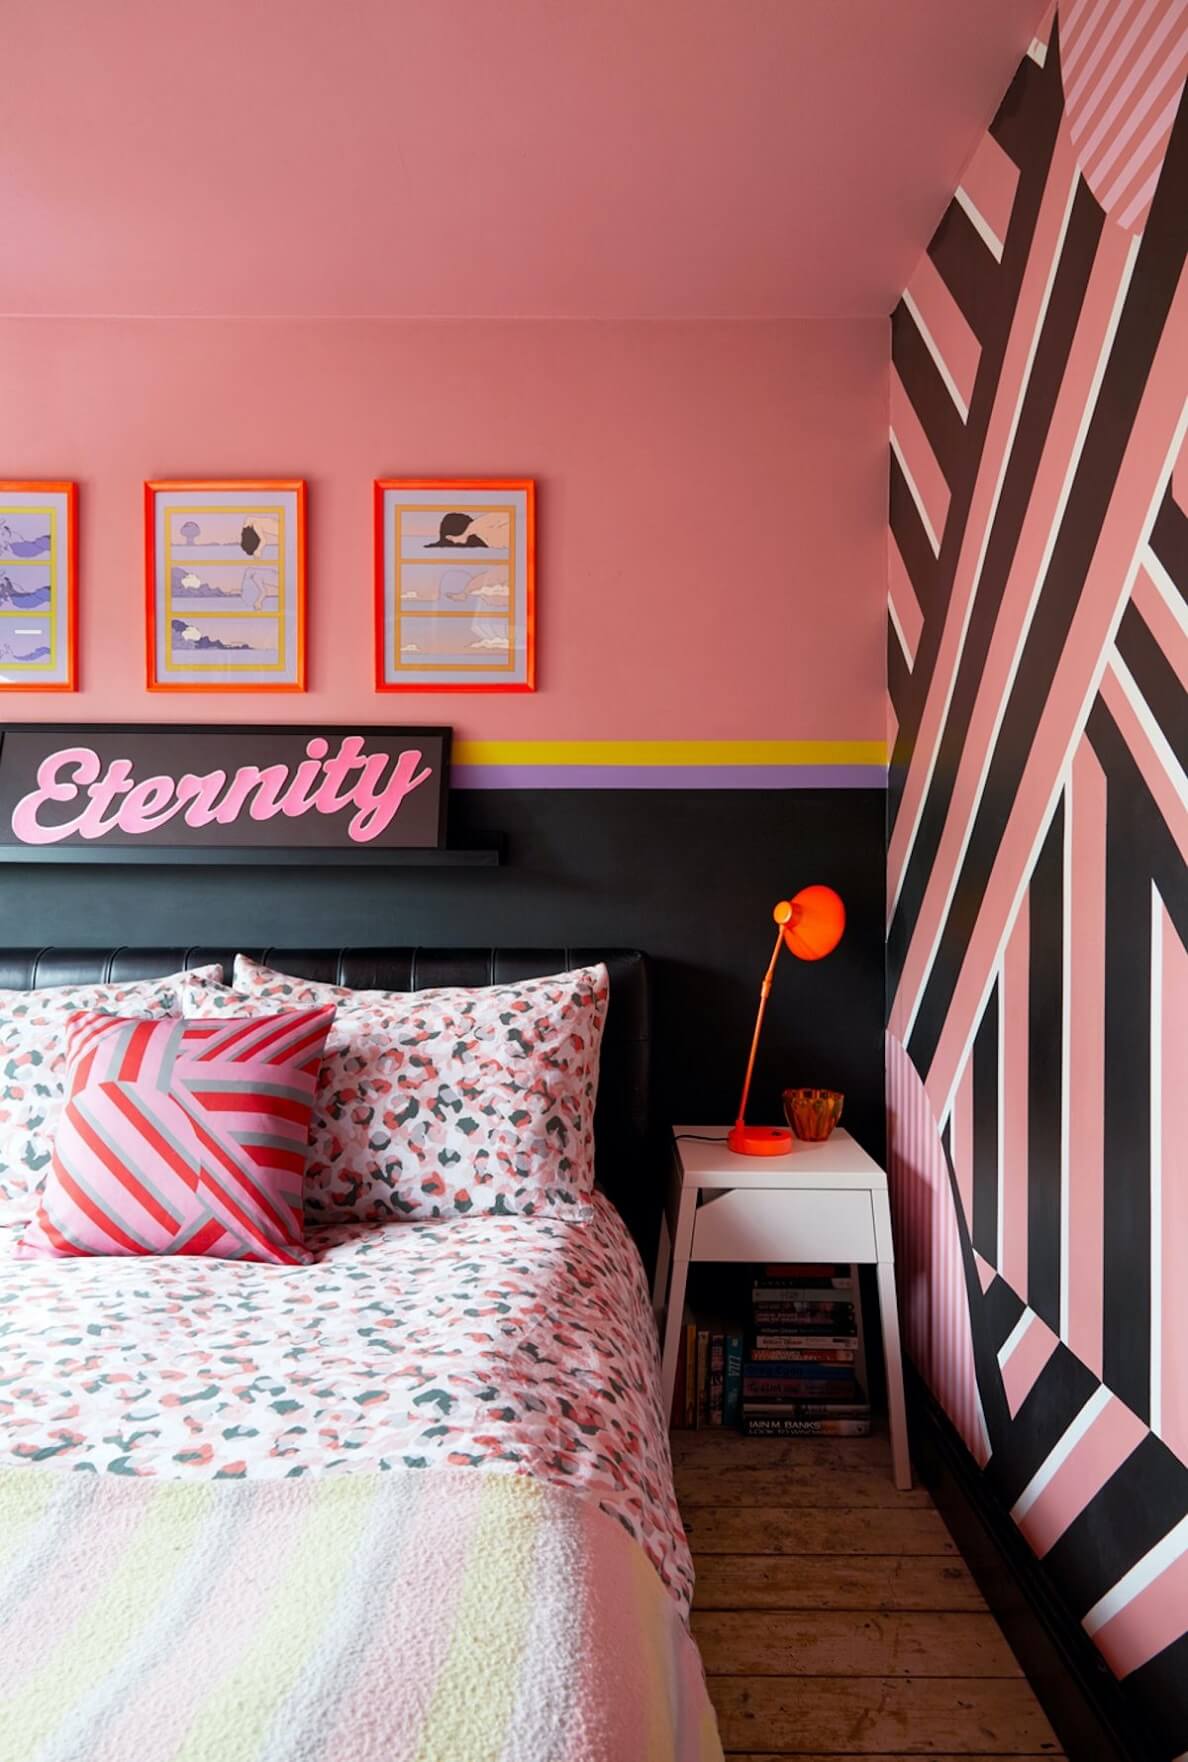 A Quirky London Home Decorated with Neon Colors